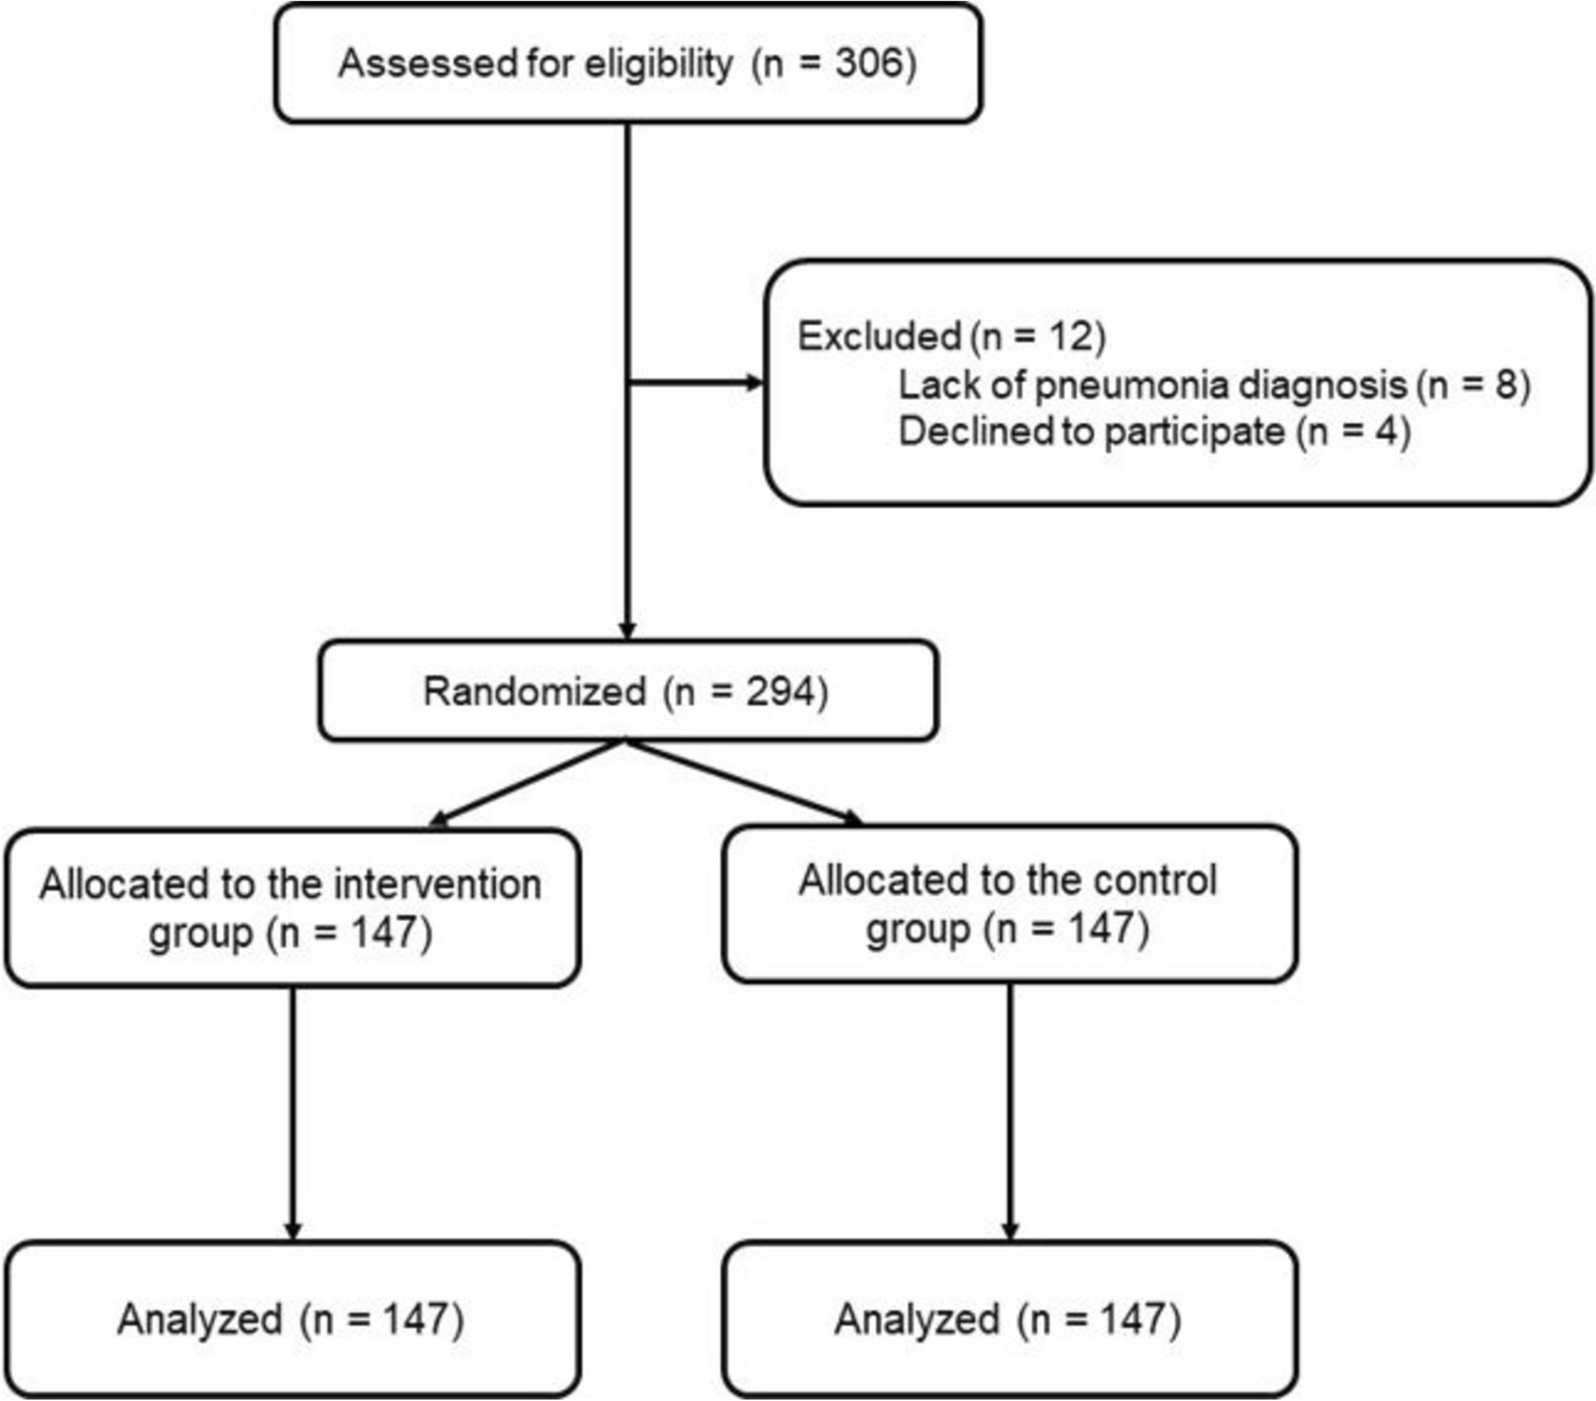 Impact of vitamin D supplementation on the clinical outcomes of COVID-19 pneumonia patients: a single-center randomized controlled trial